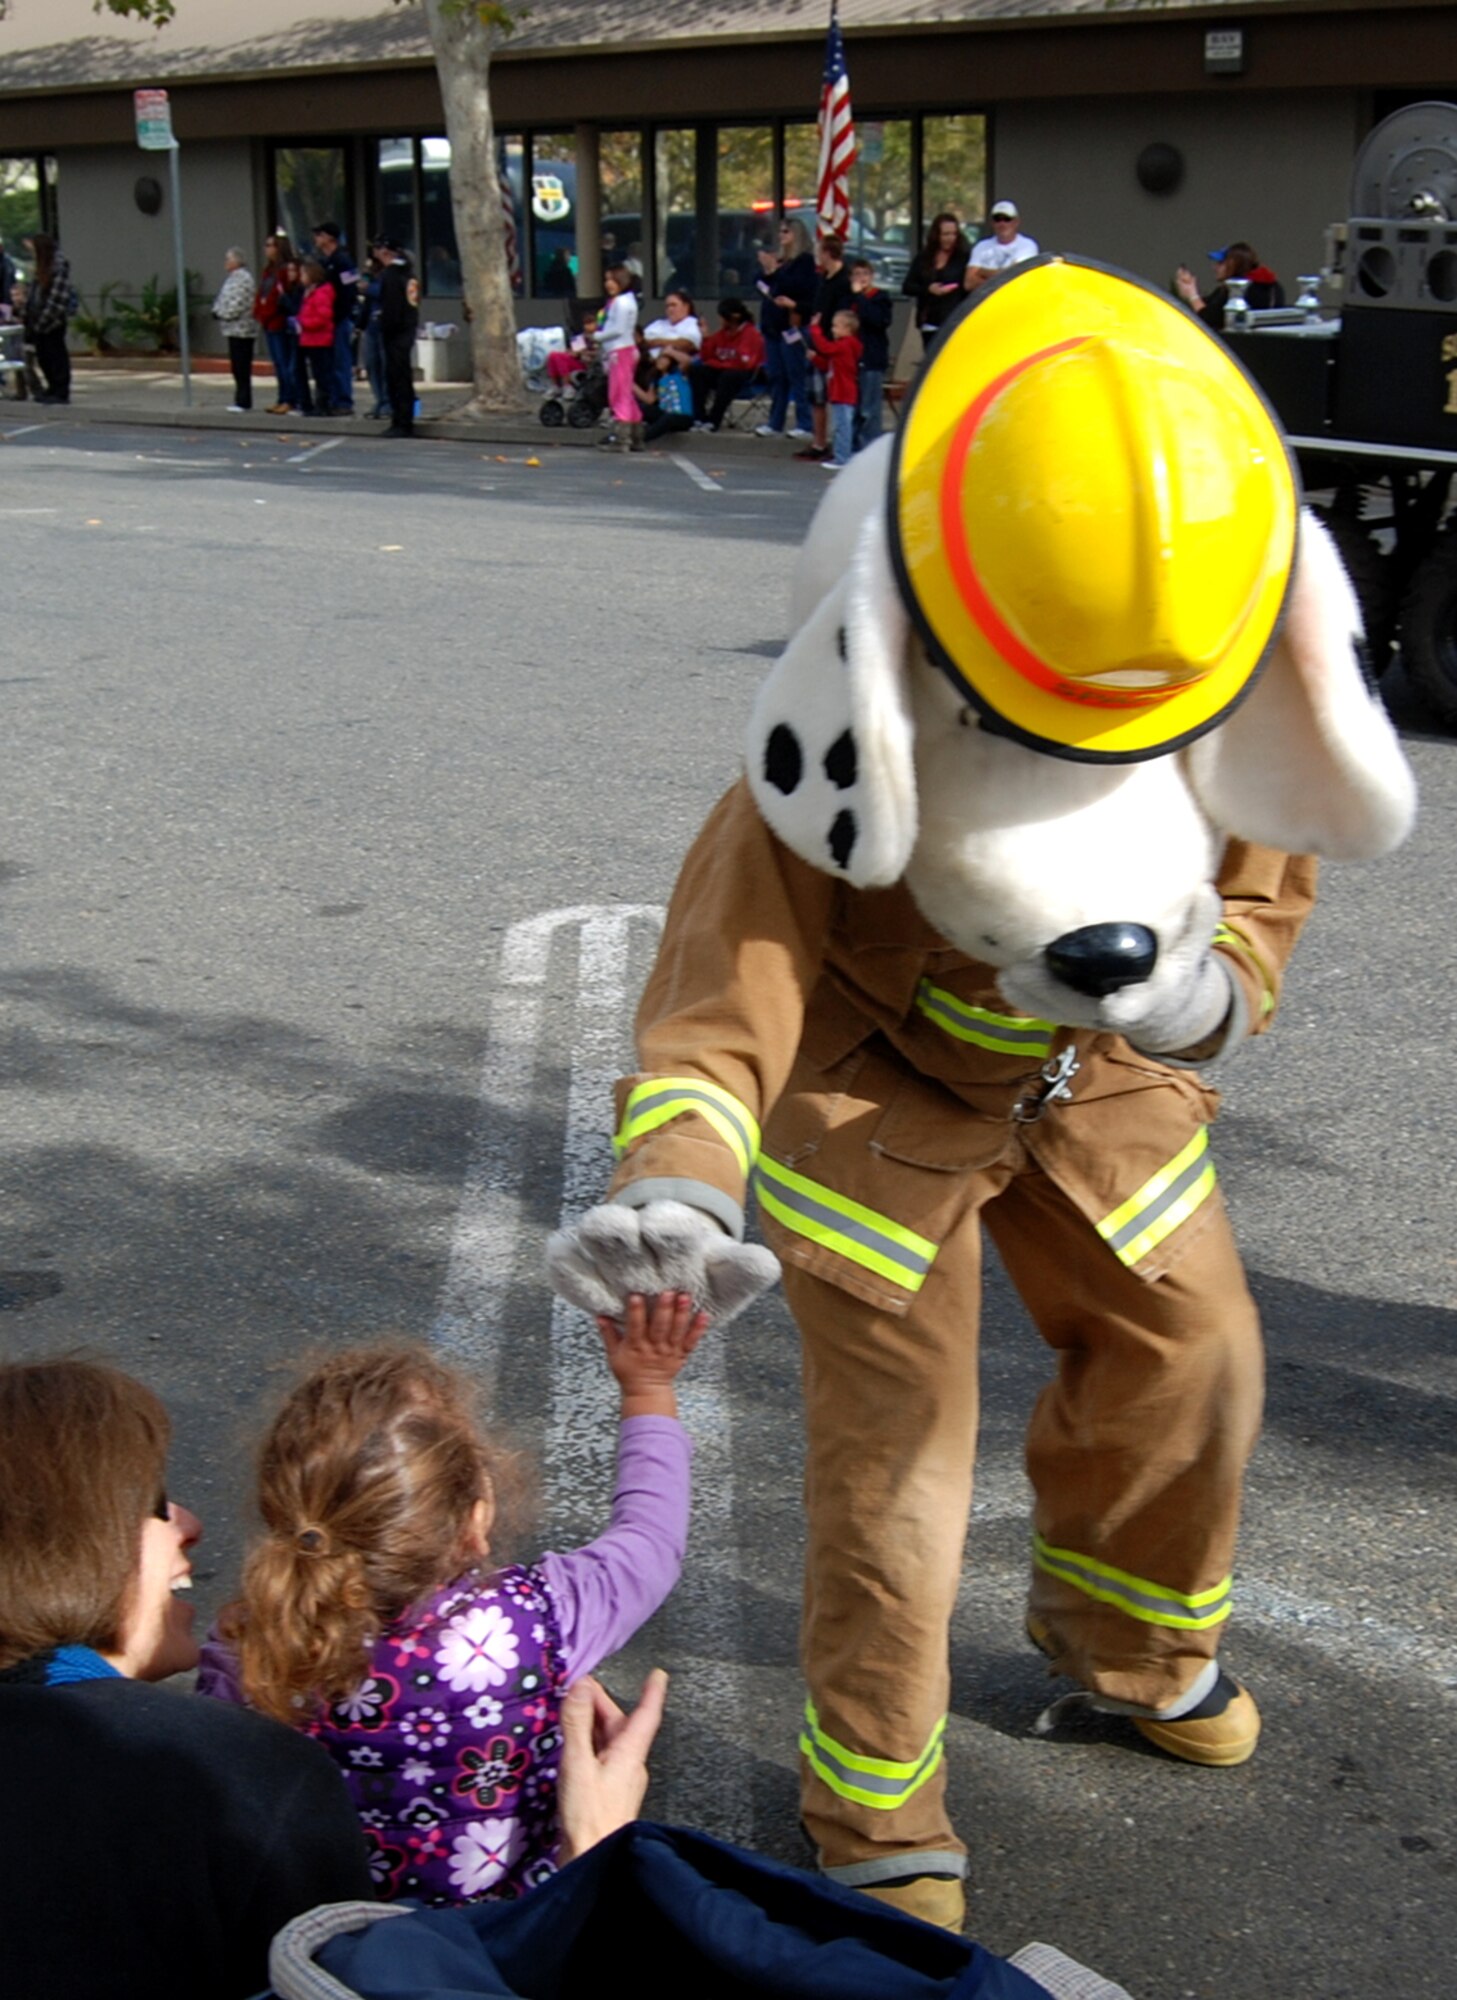 Sparky the Fire Dog gives a high five to a girl sitting along the parade route during the Yuba-Sutter Veterans Day Parade in Marysville, Calif., Nov. 11, 2012. More than 400 Team Beale Airmen participated in the parade. (U.S. Air Force photo by Capt. Brian Wagner/Released)